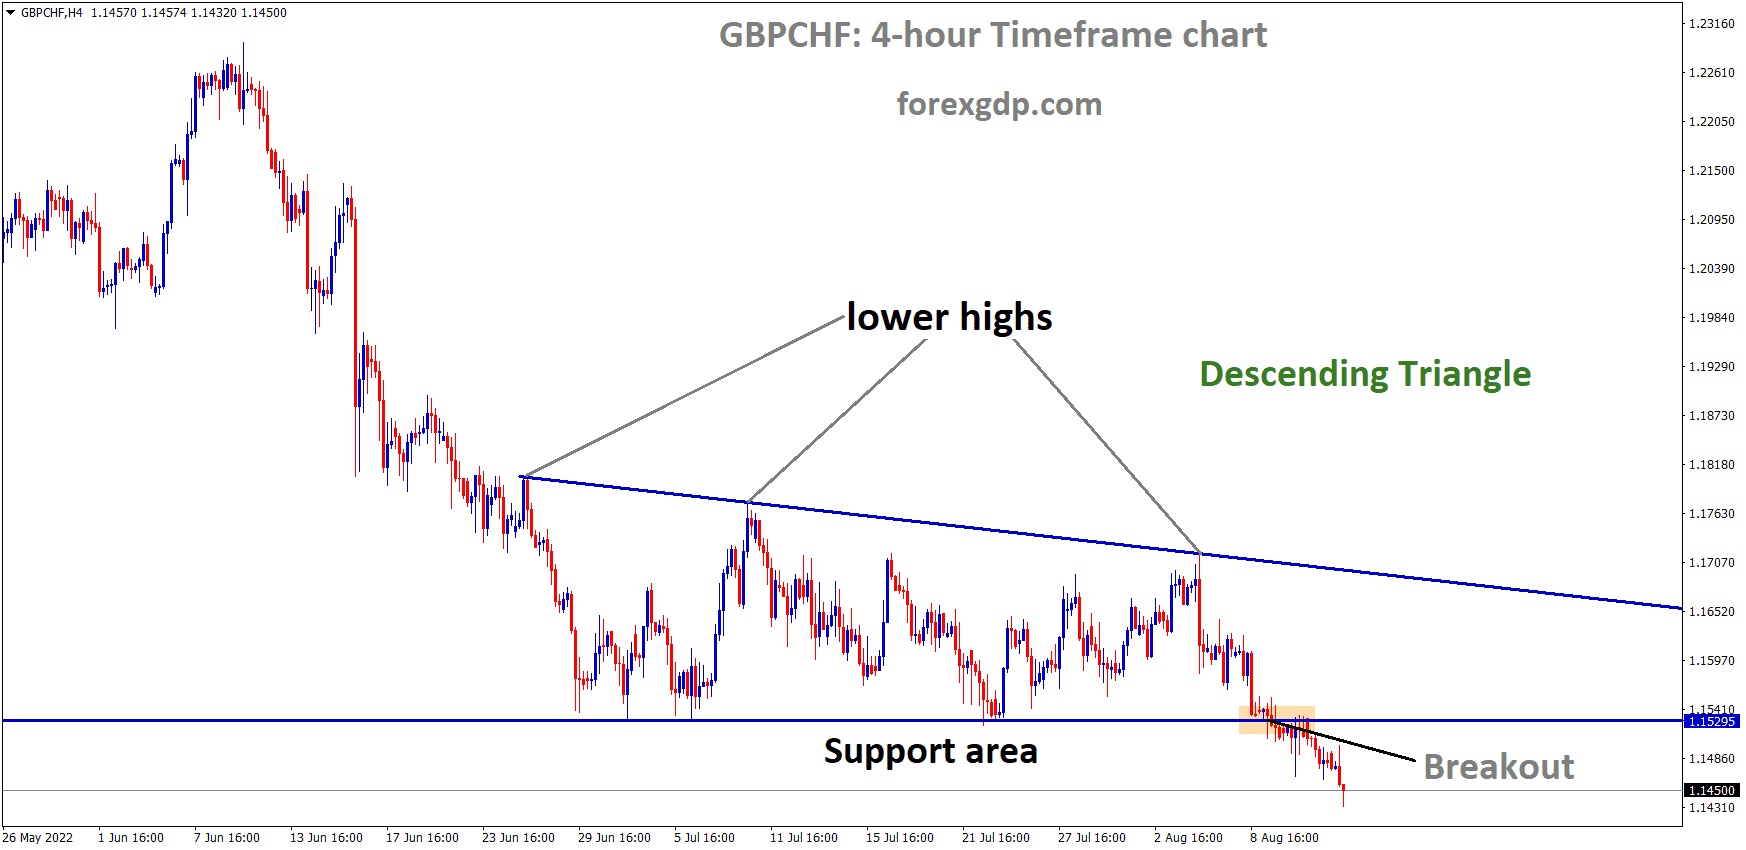 GBPCHF has broken the Descending triangle pattern in Downside.